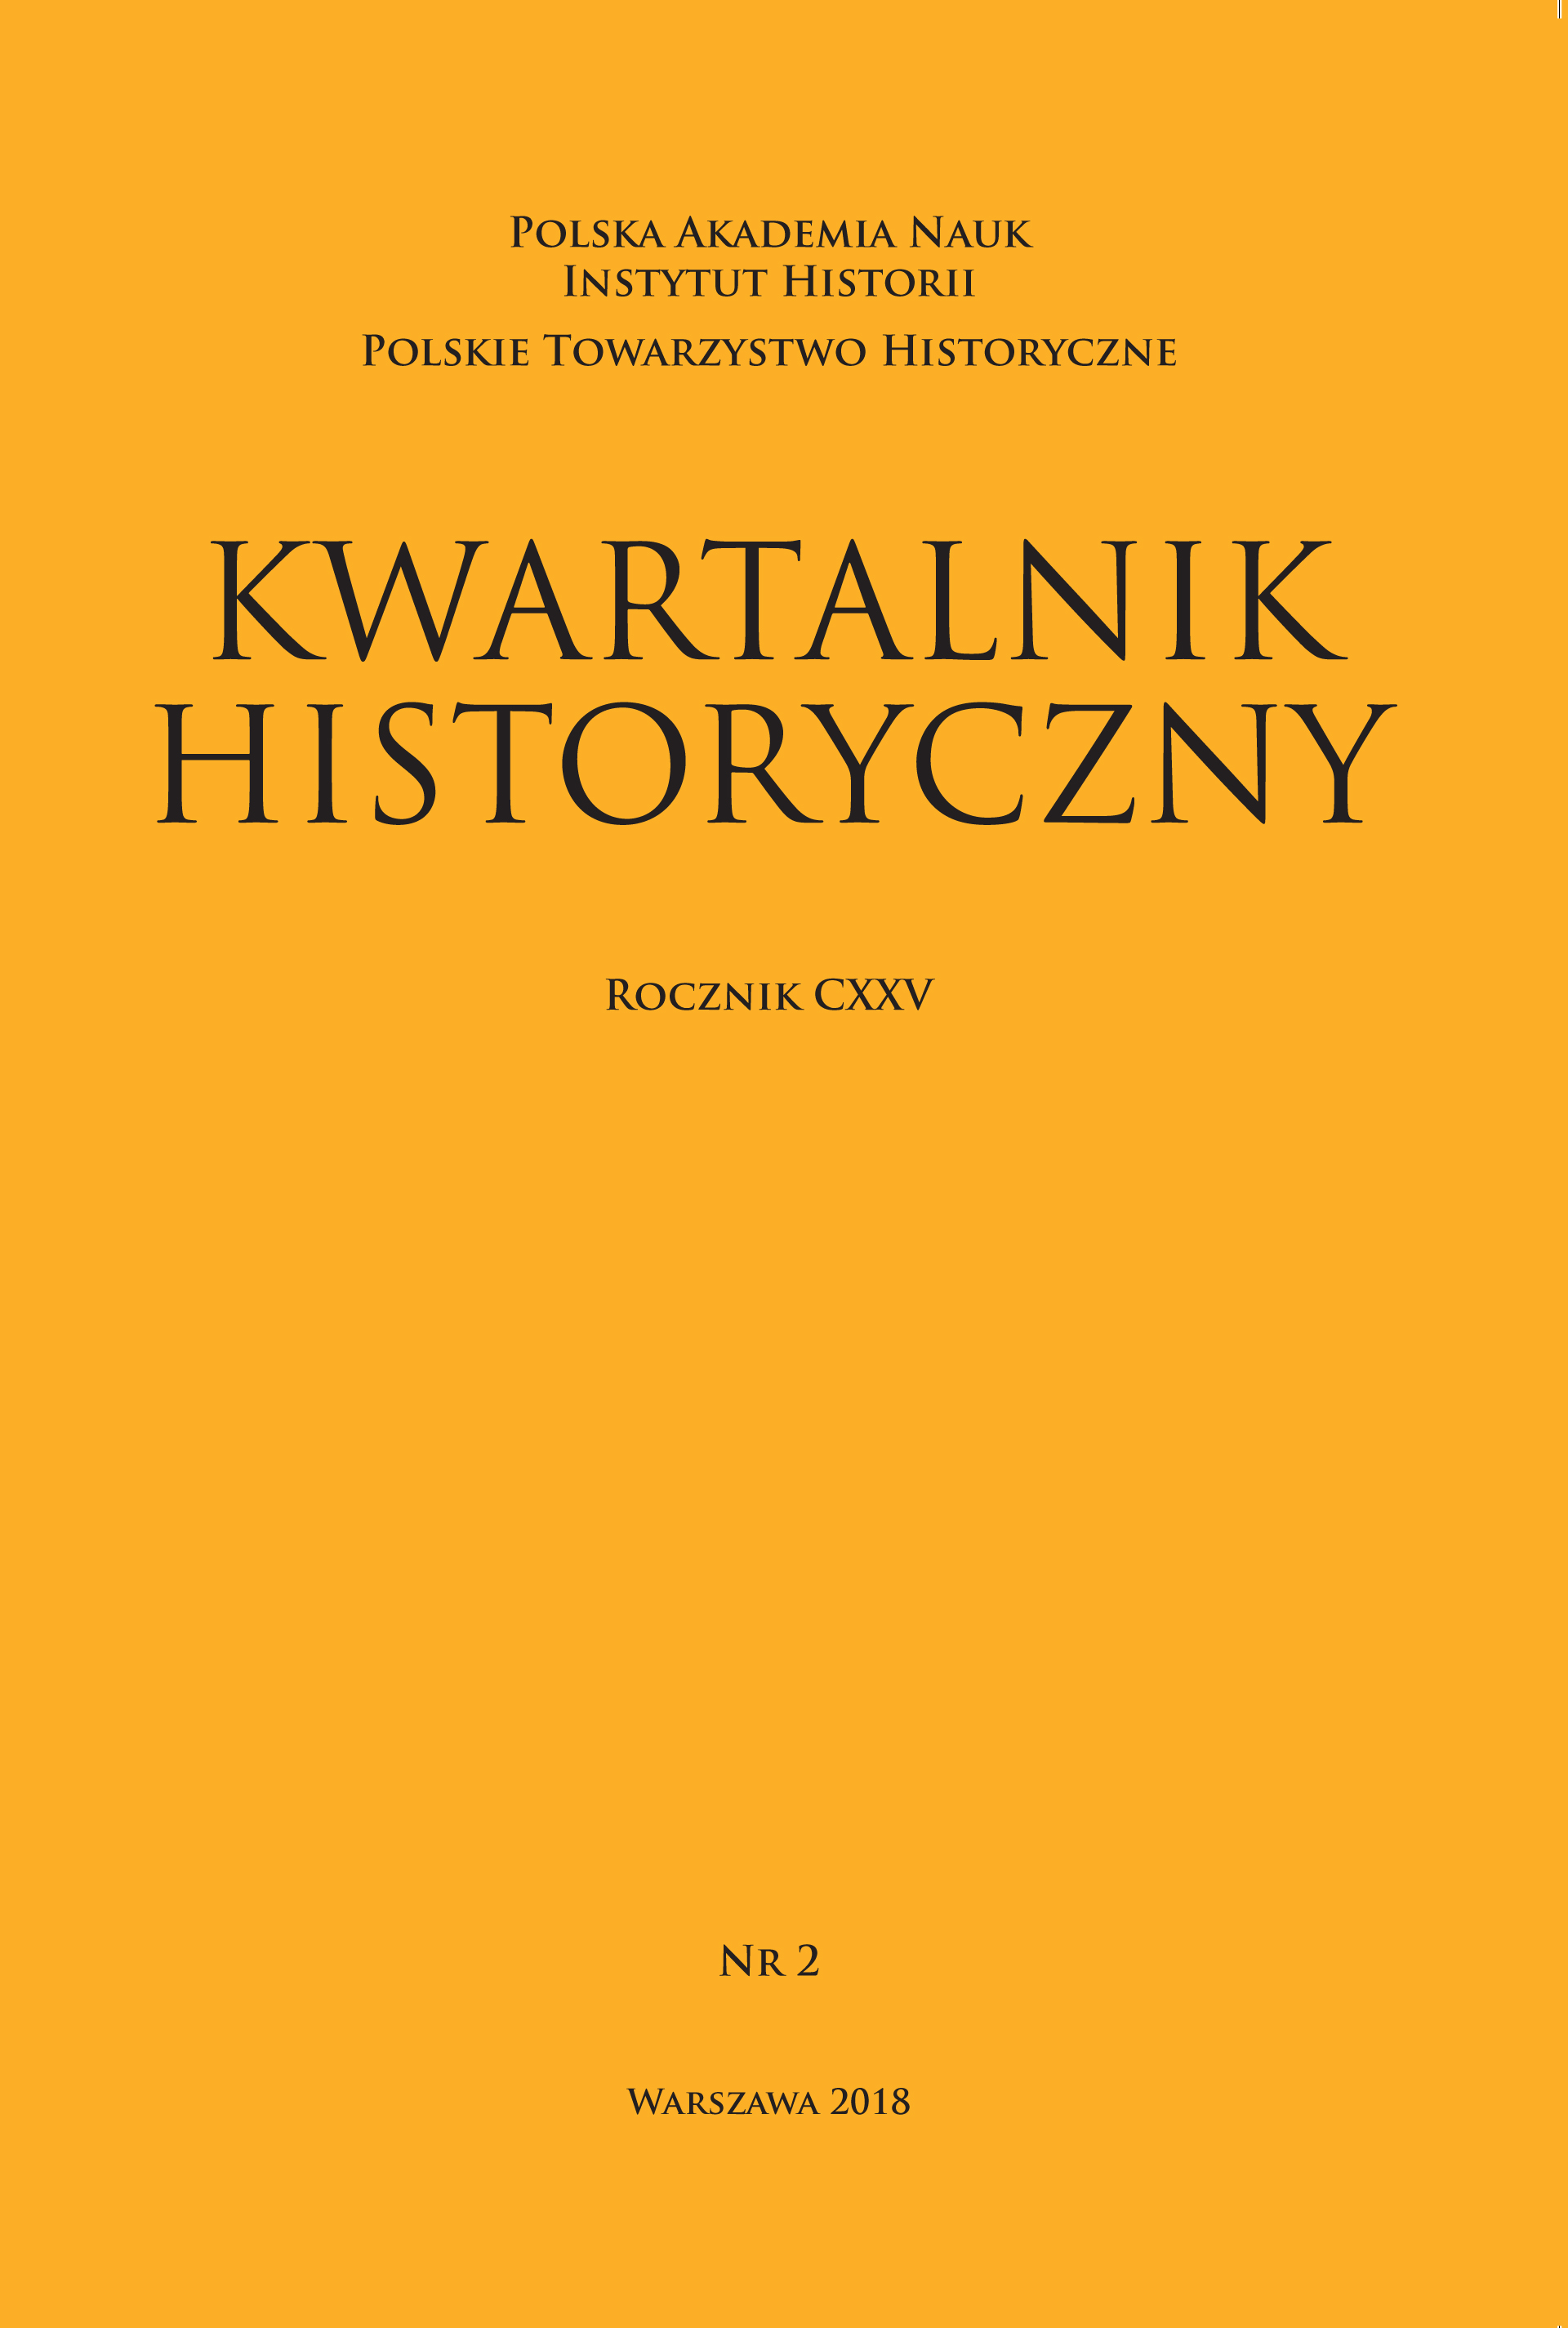 Reflections on the decline and rebirth of states (on the occasion of the 100th anniversary of Poland regaining its independence) Cover Image